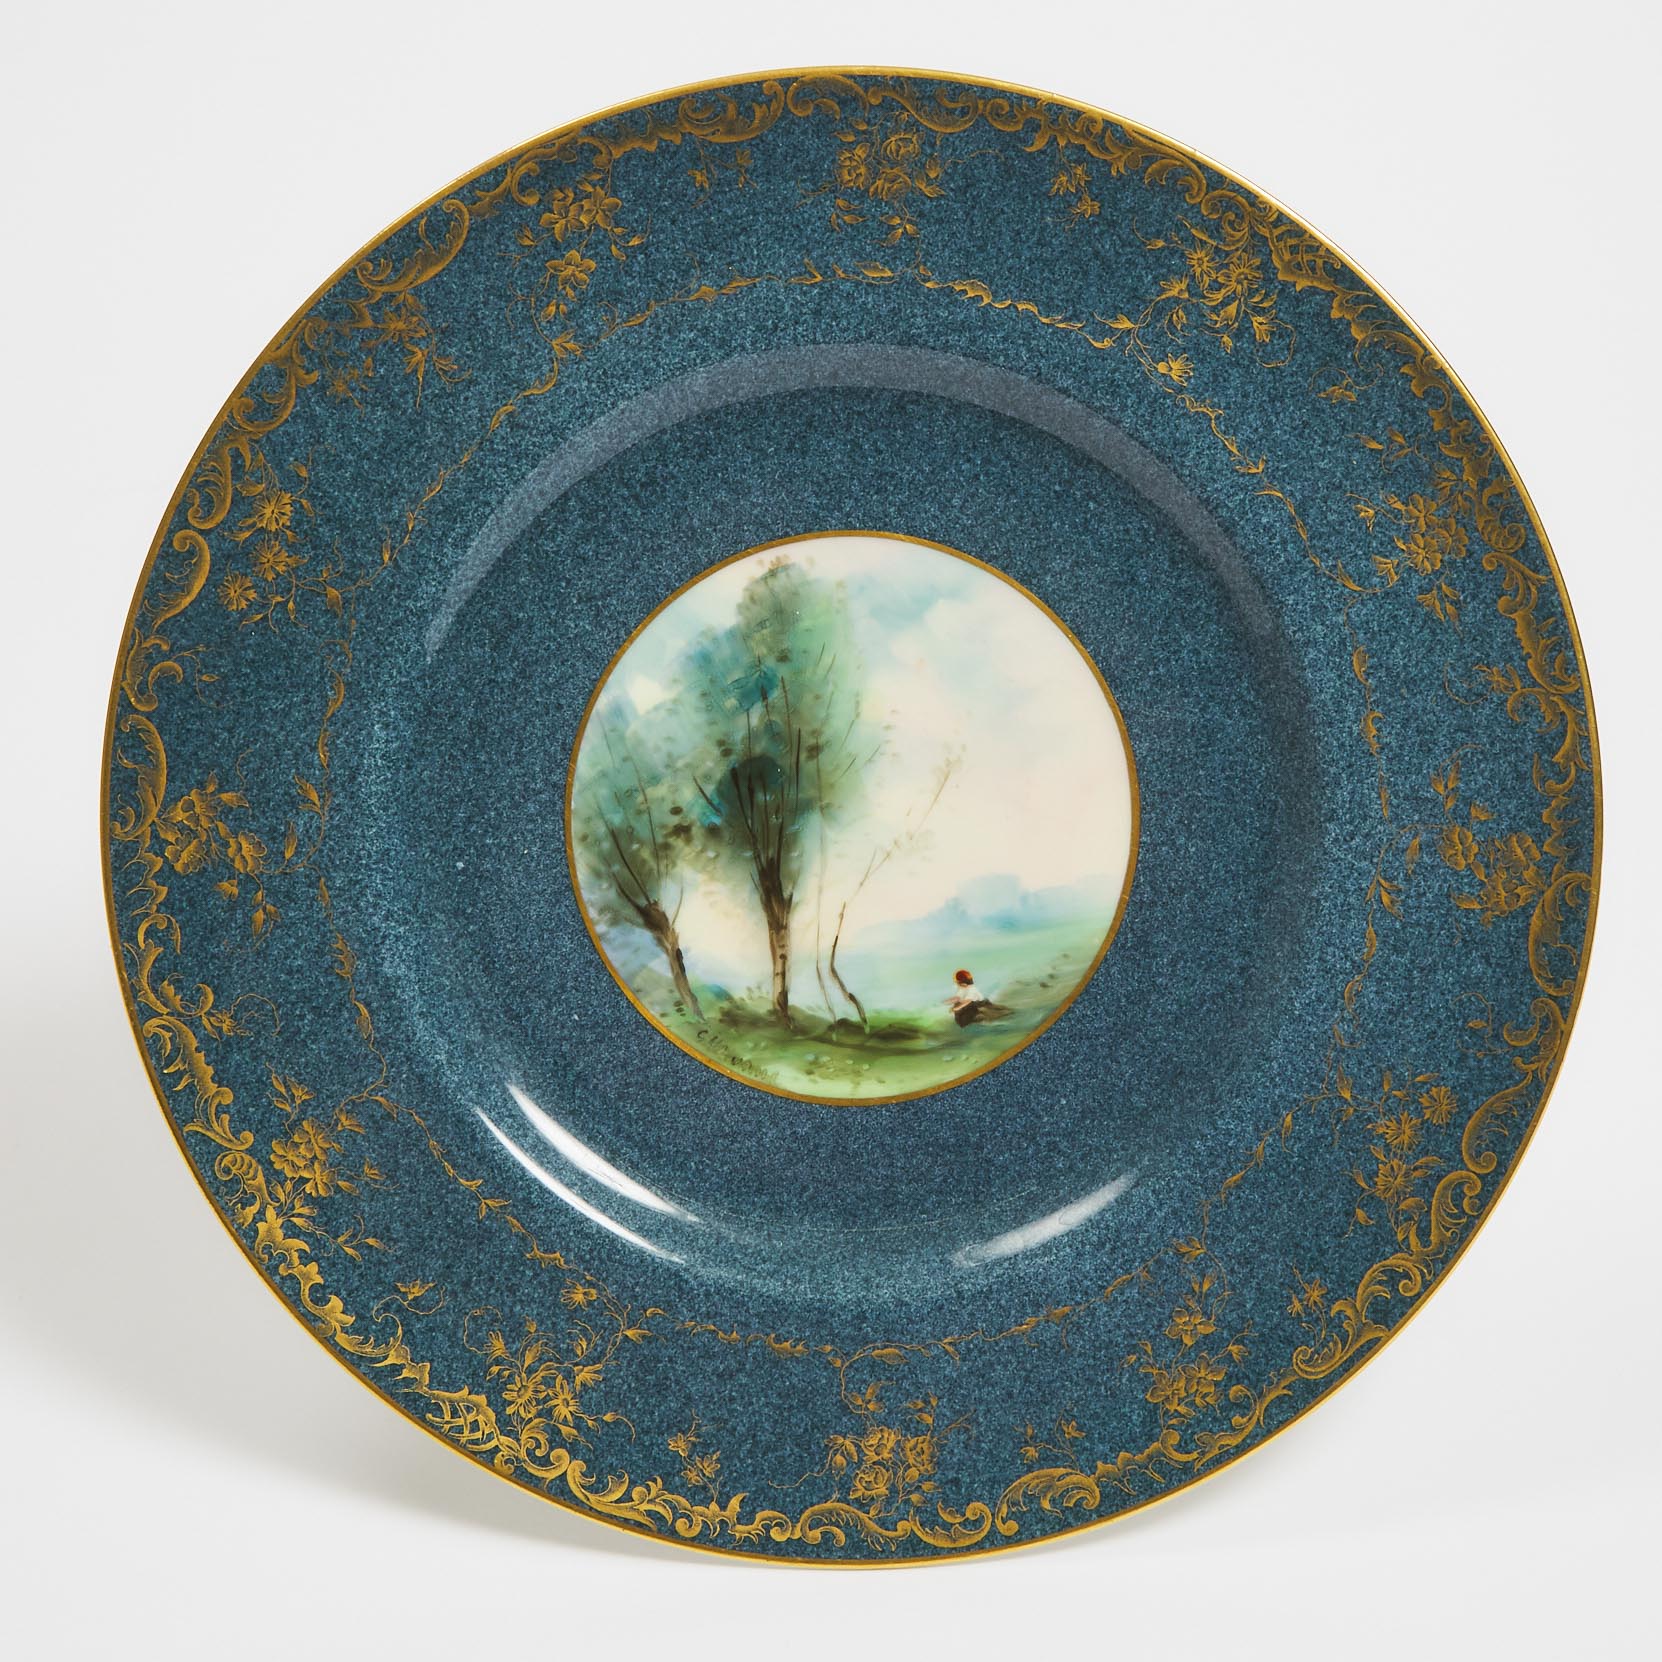 Royal Worcester Powder Blue and Gilt Ground Corot-Style Scenic Paneled Plate, George M. Evans, c.1933